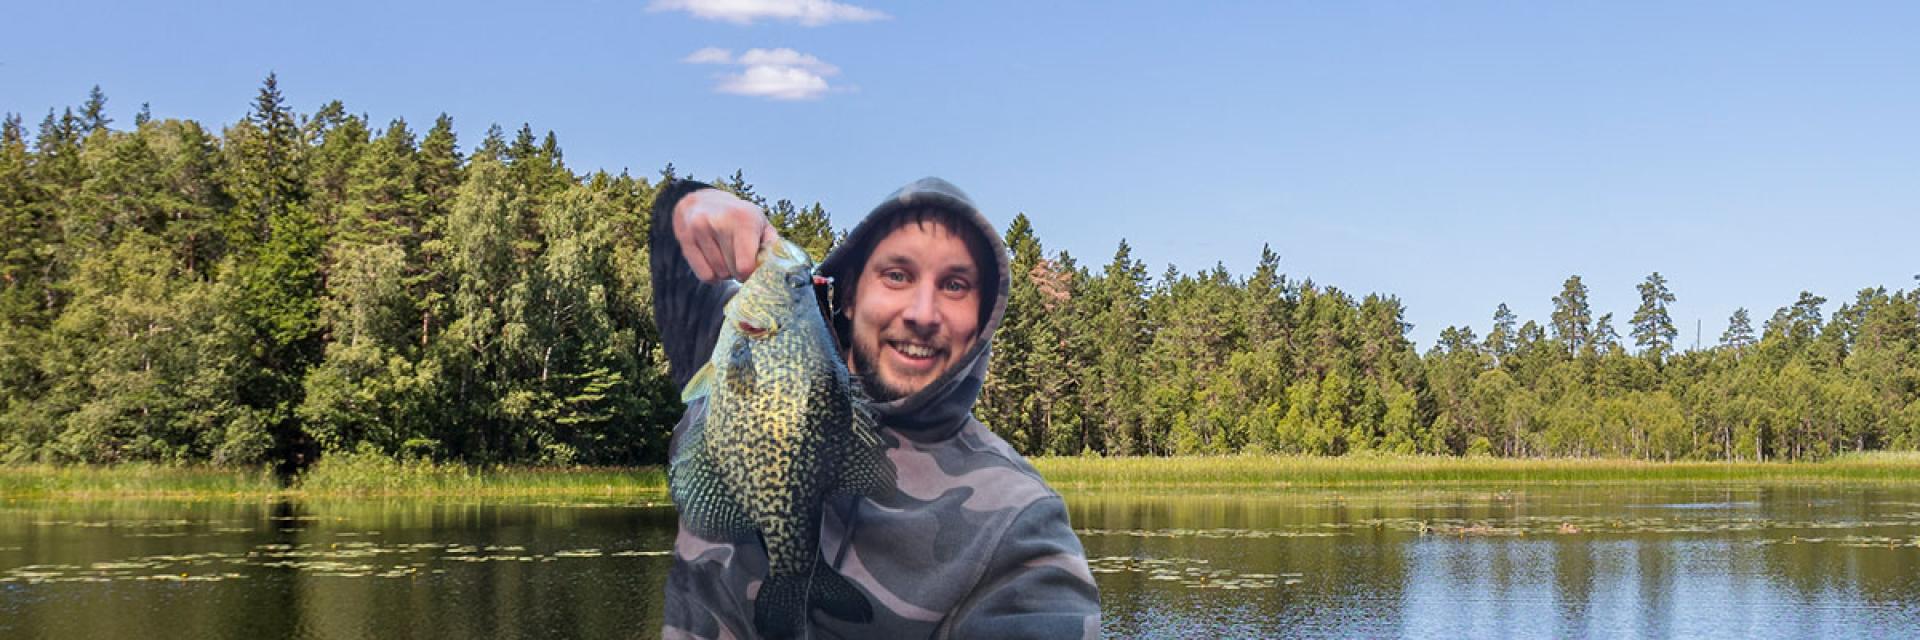 Gregory standing in front of a lake with trees across the water, holding a large fish and smiling.